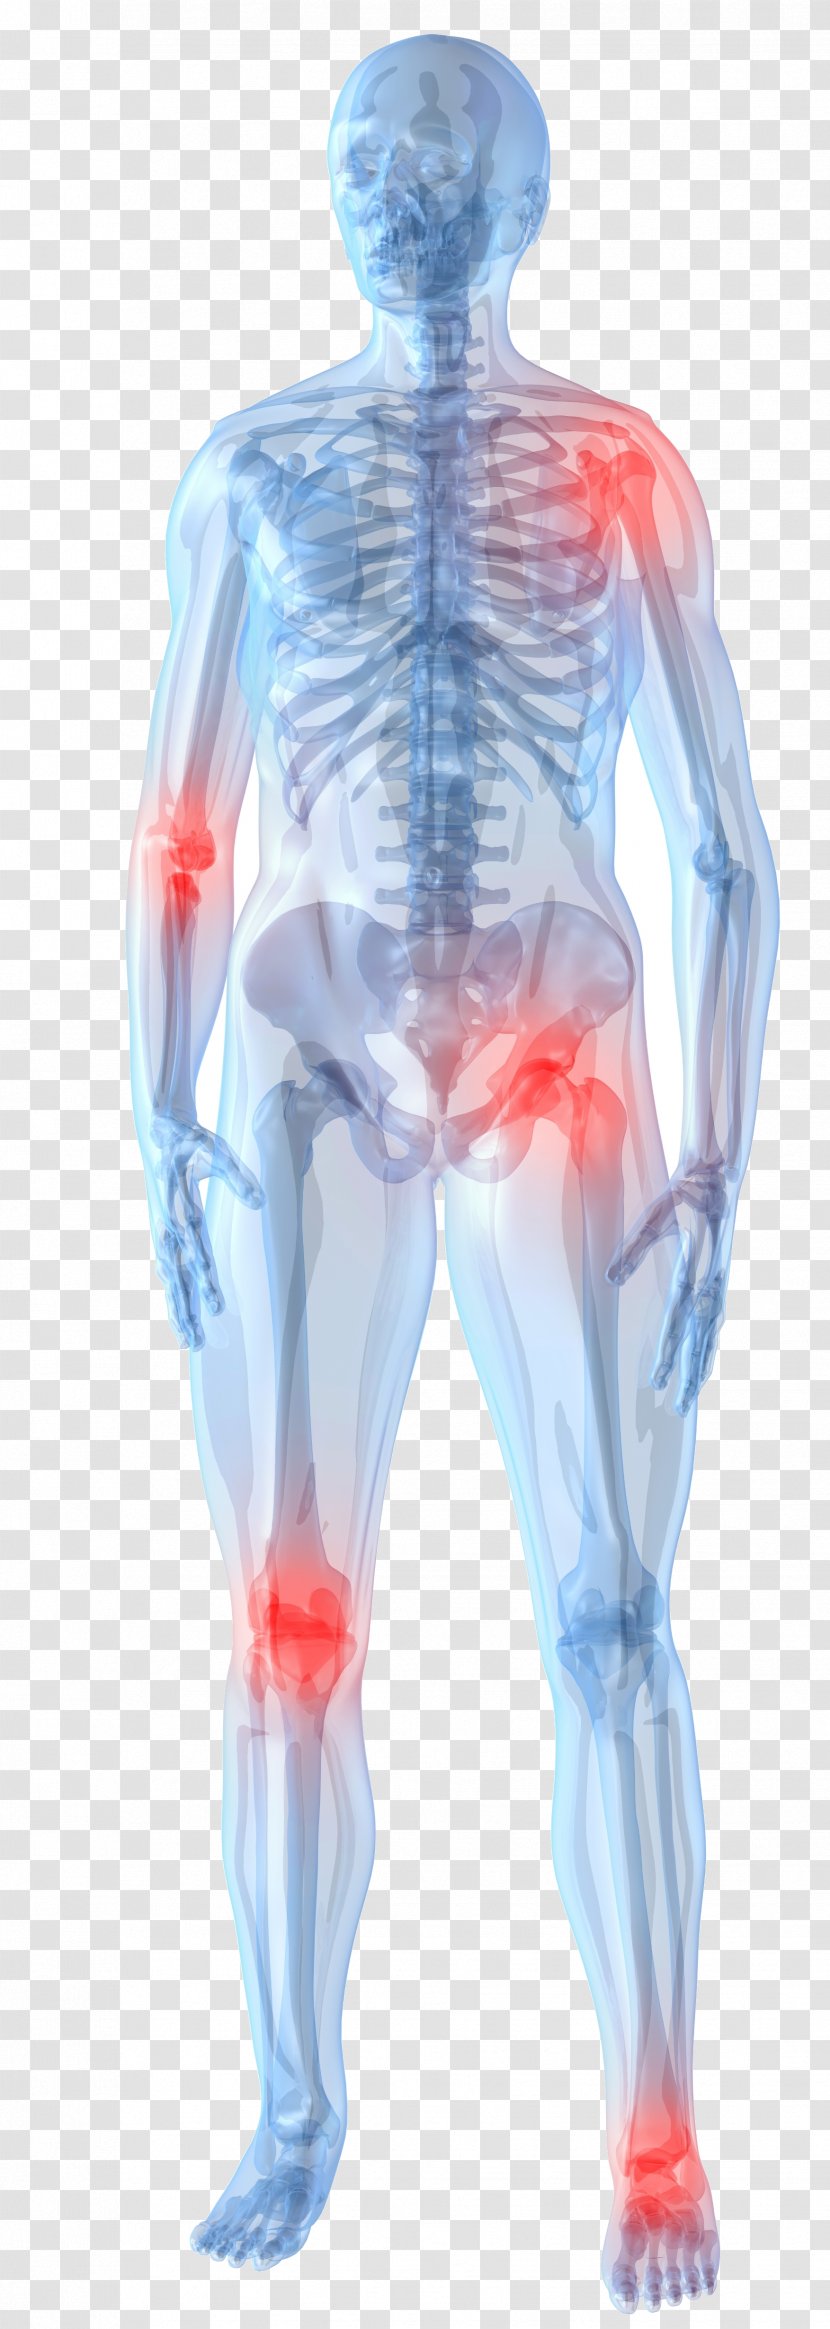 Knee Pain Management Arthritis Joint Therapy - Silhouette Transparent PNG